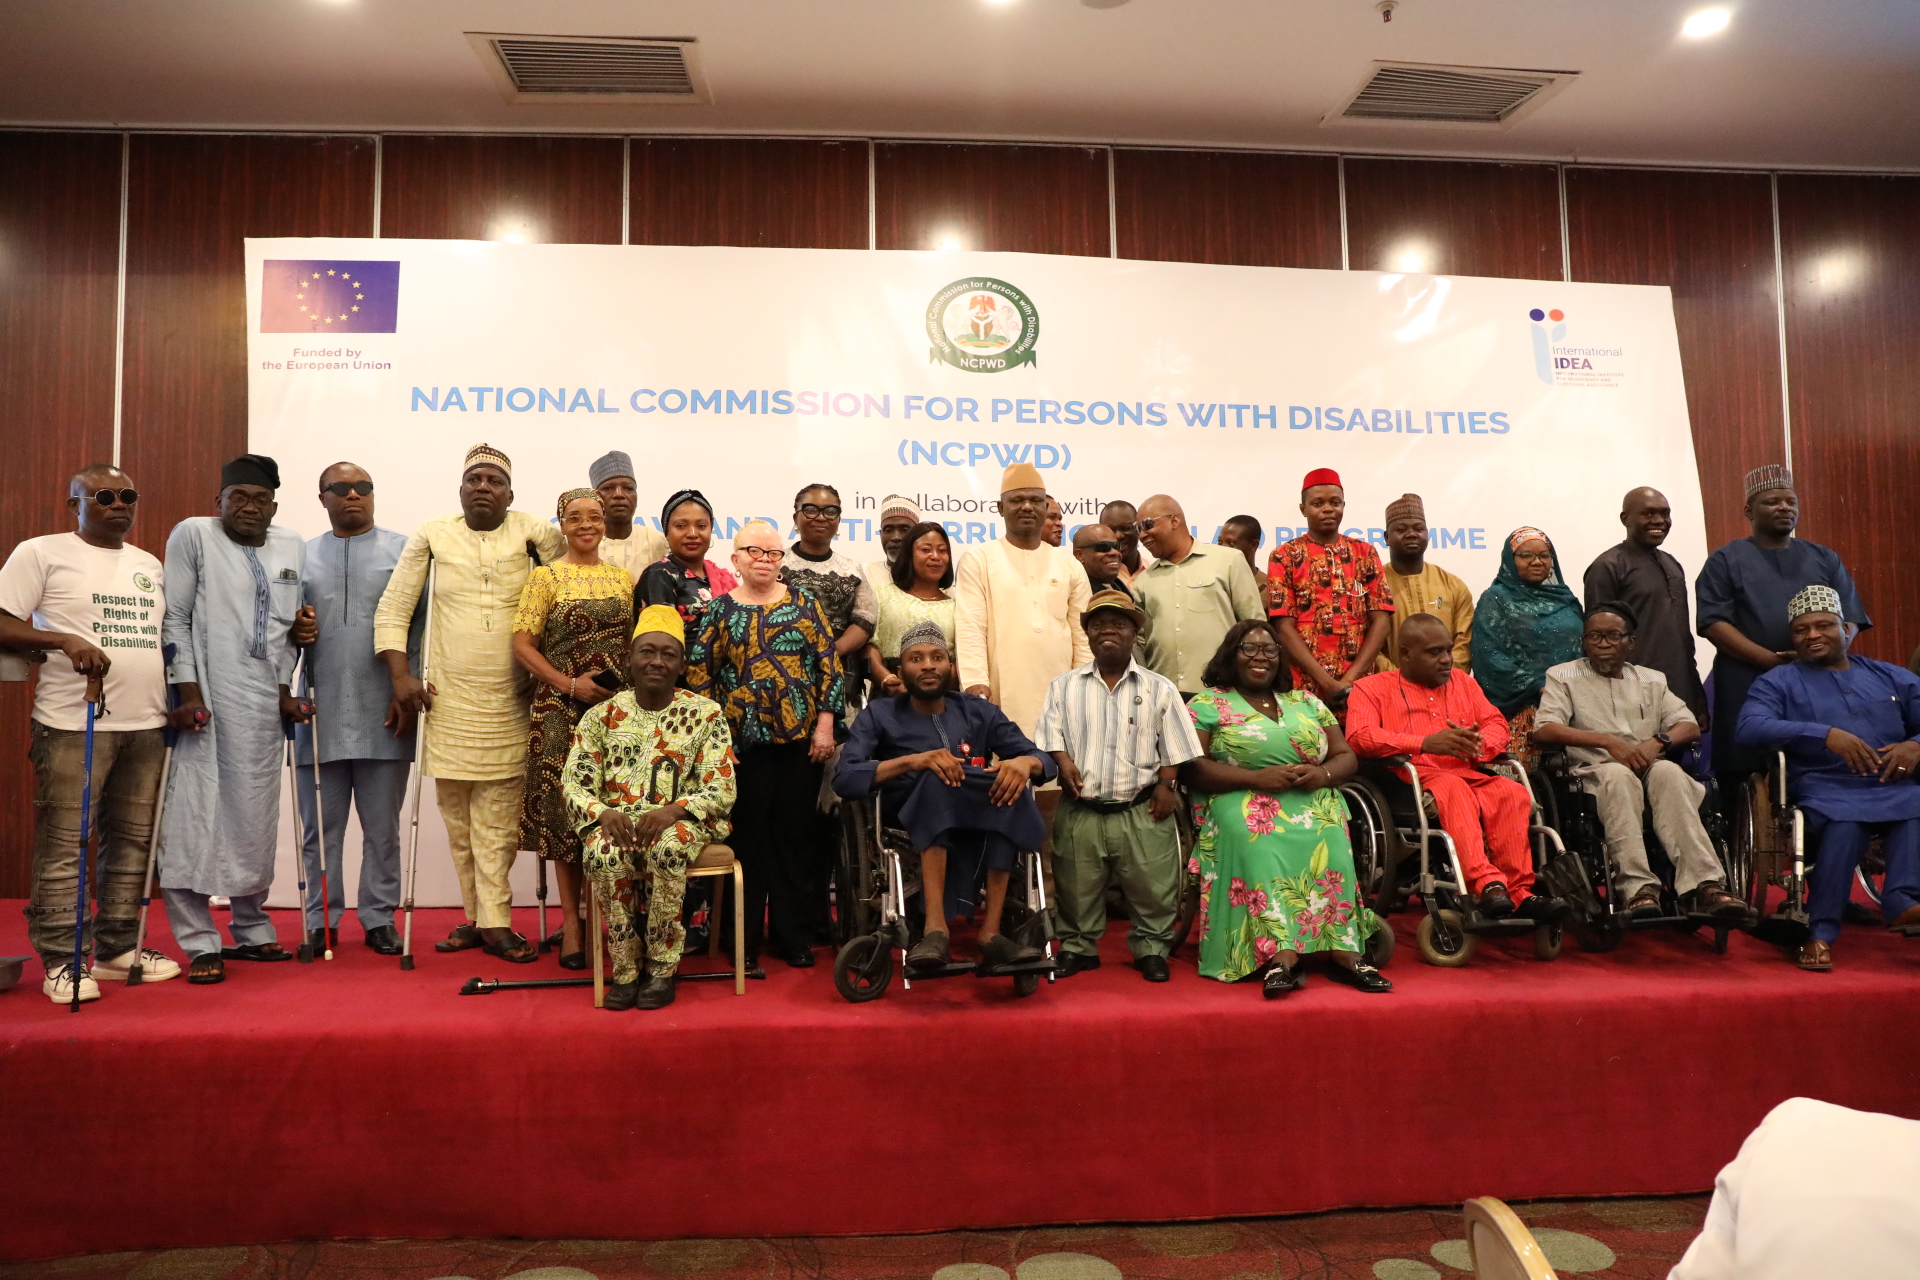 A cross section of participants from a persons with disabilities workshop held in Nigeria.